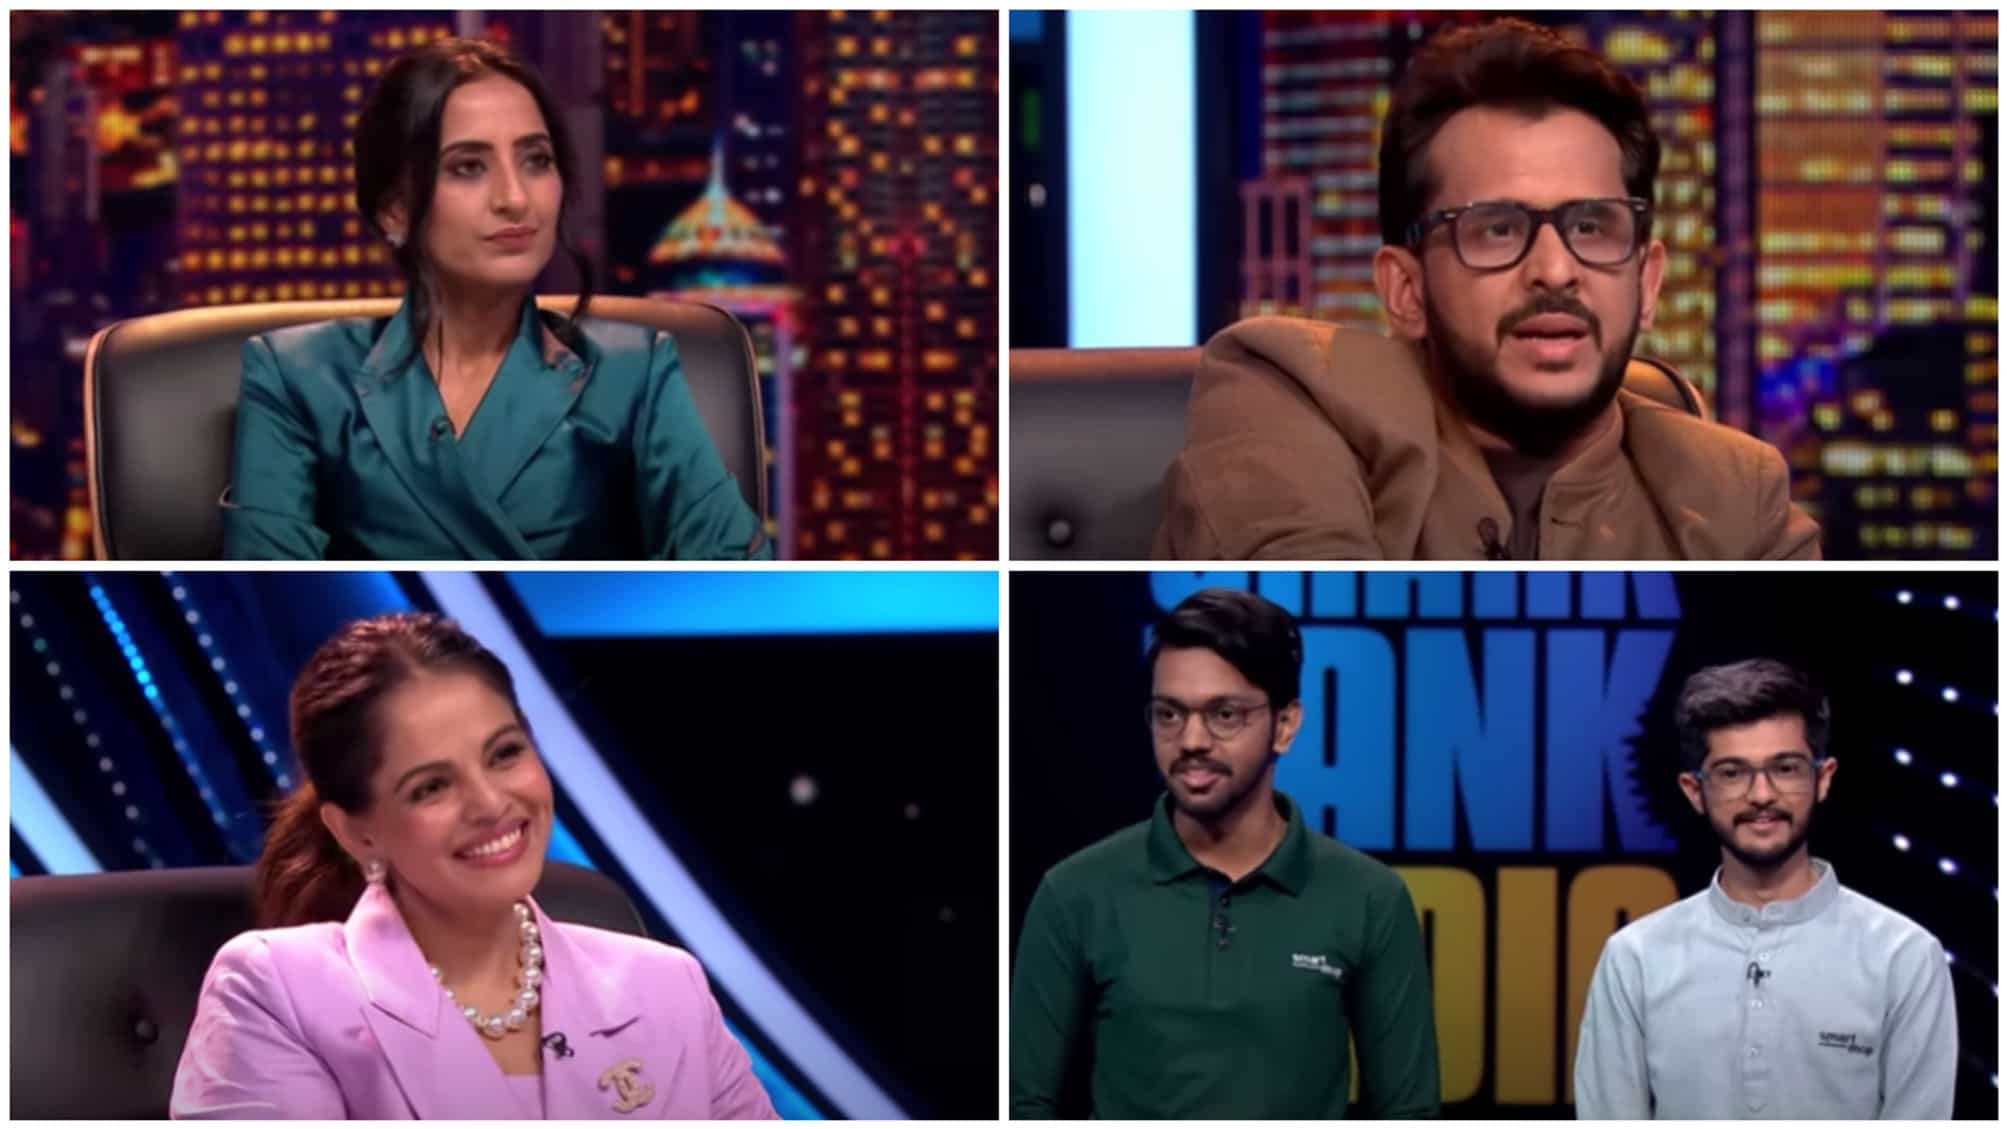 https://www.mobilemasala.com/film-gossip/Shark-Tank-India-Season-3-24-year-old-pitchers-of-a-smart-mop-seek-Rs-15-lakhs-for-1percentage-equity-will-they-crack-the-deal-i251470